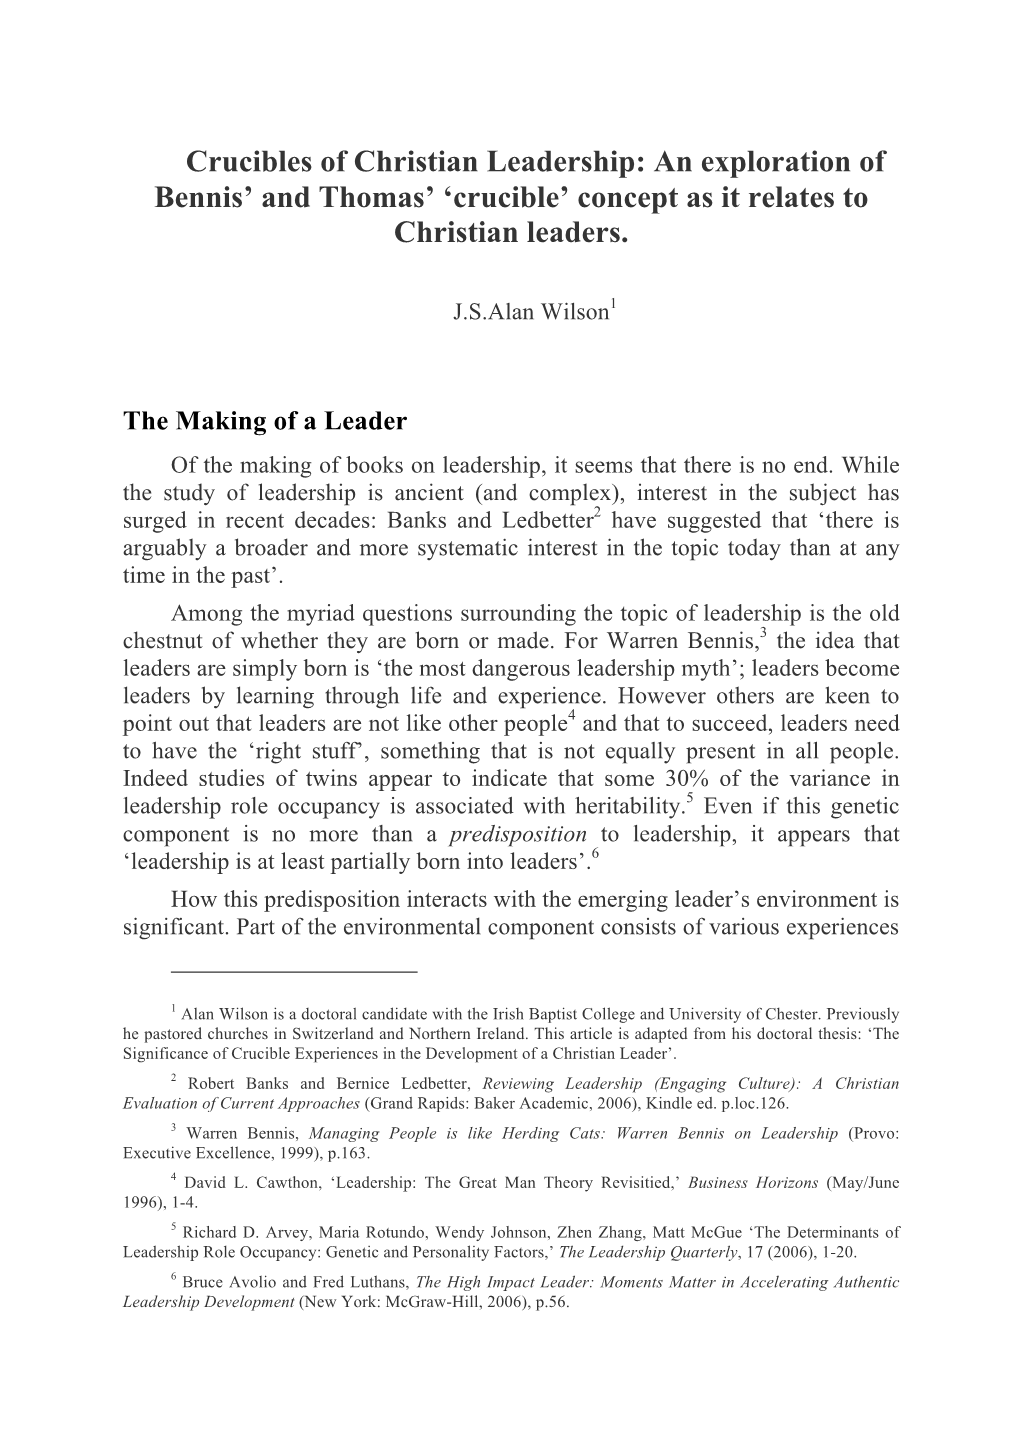 Crucibles of Christian Leadership: an Exploration of Bennis’ and Thomas’ ‘Crucible’ Concept As It Relates to Christian Leaders